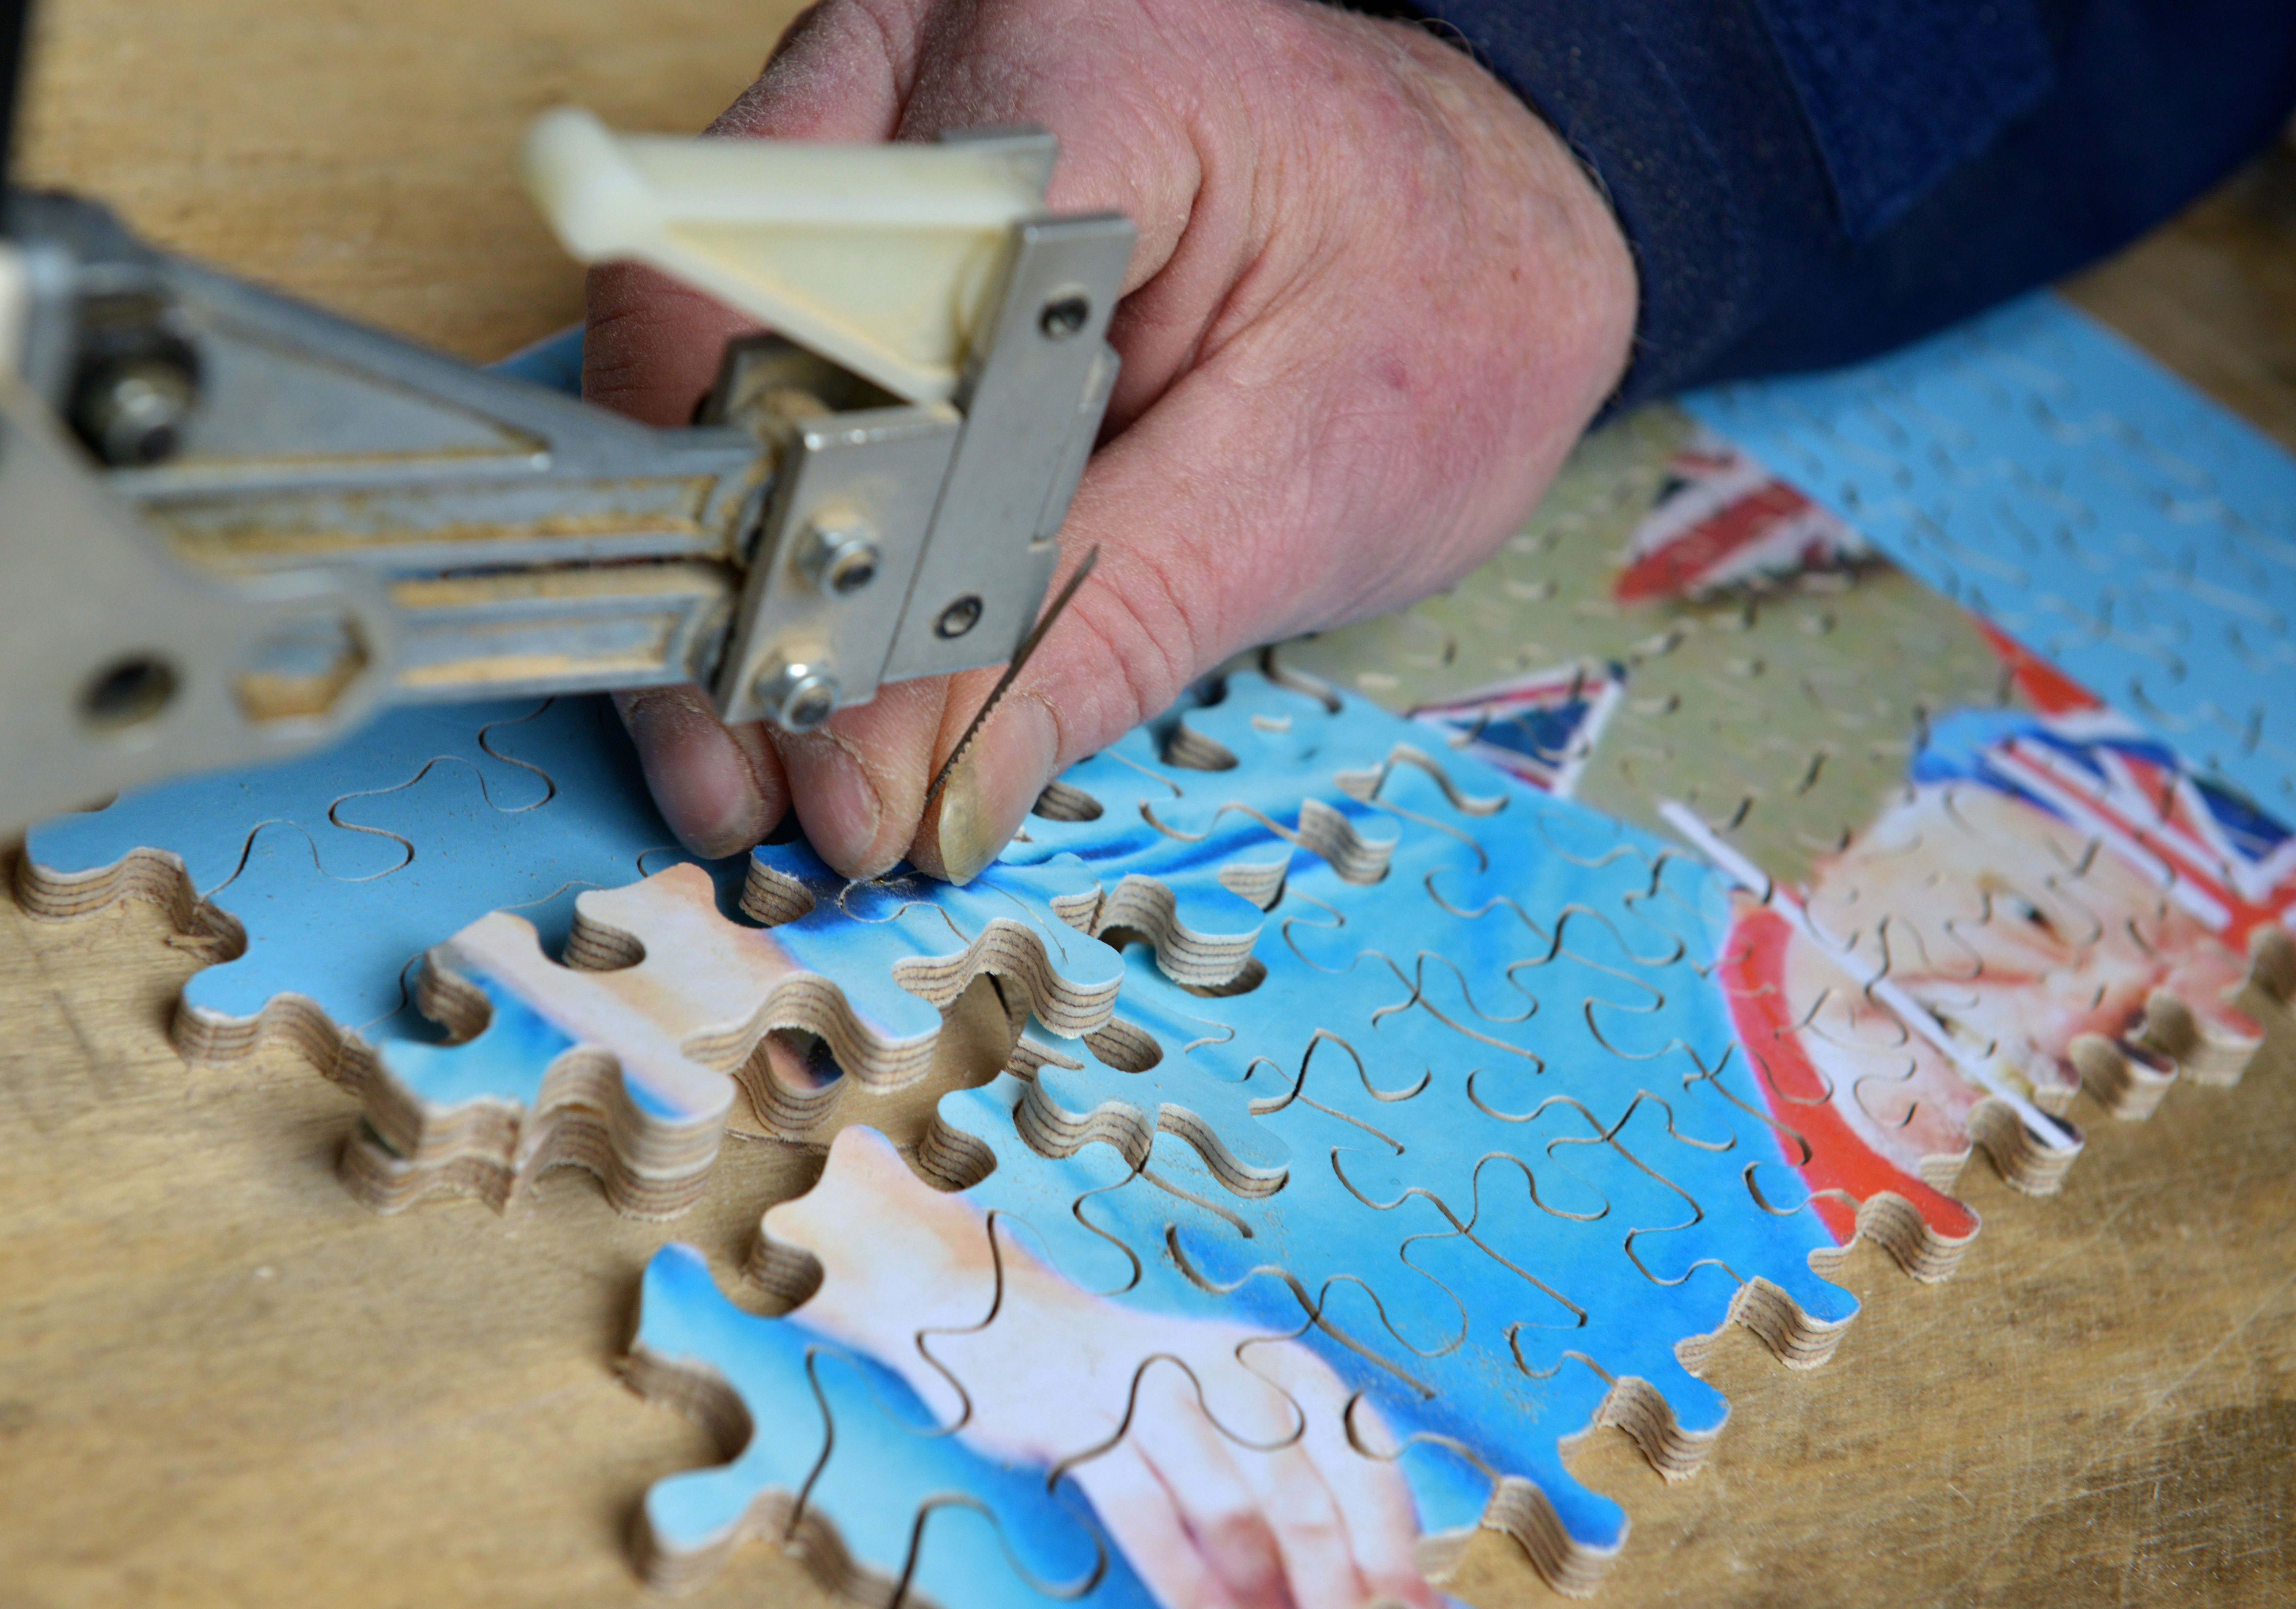 next price Eat dinner How to Solve a Jigsaw Puzzle Fast | Reader's Digest